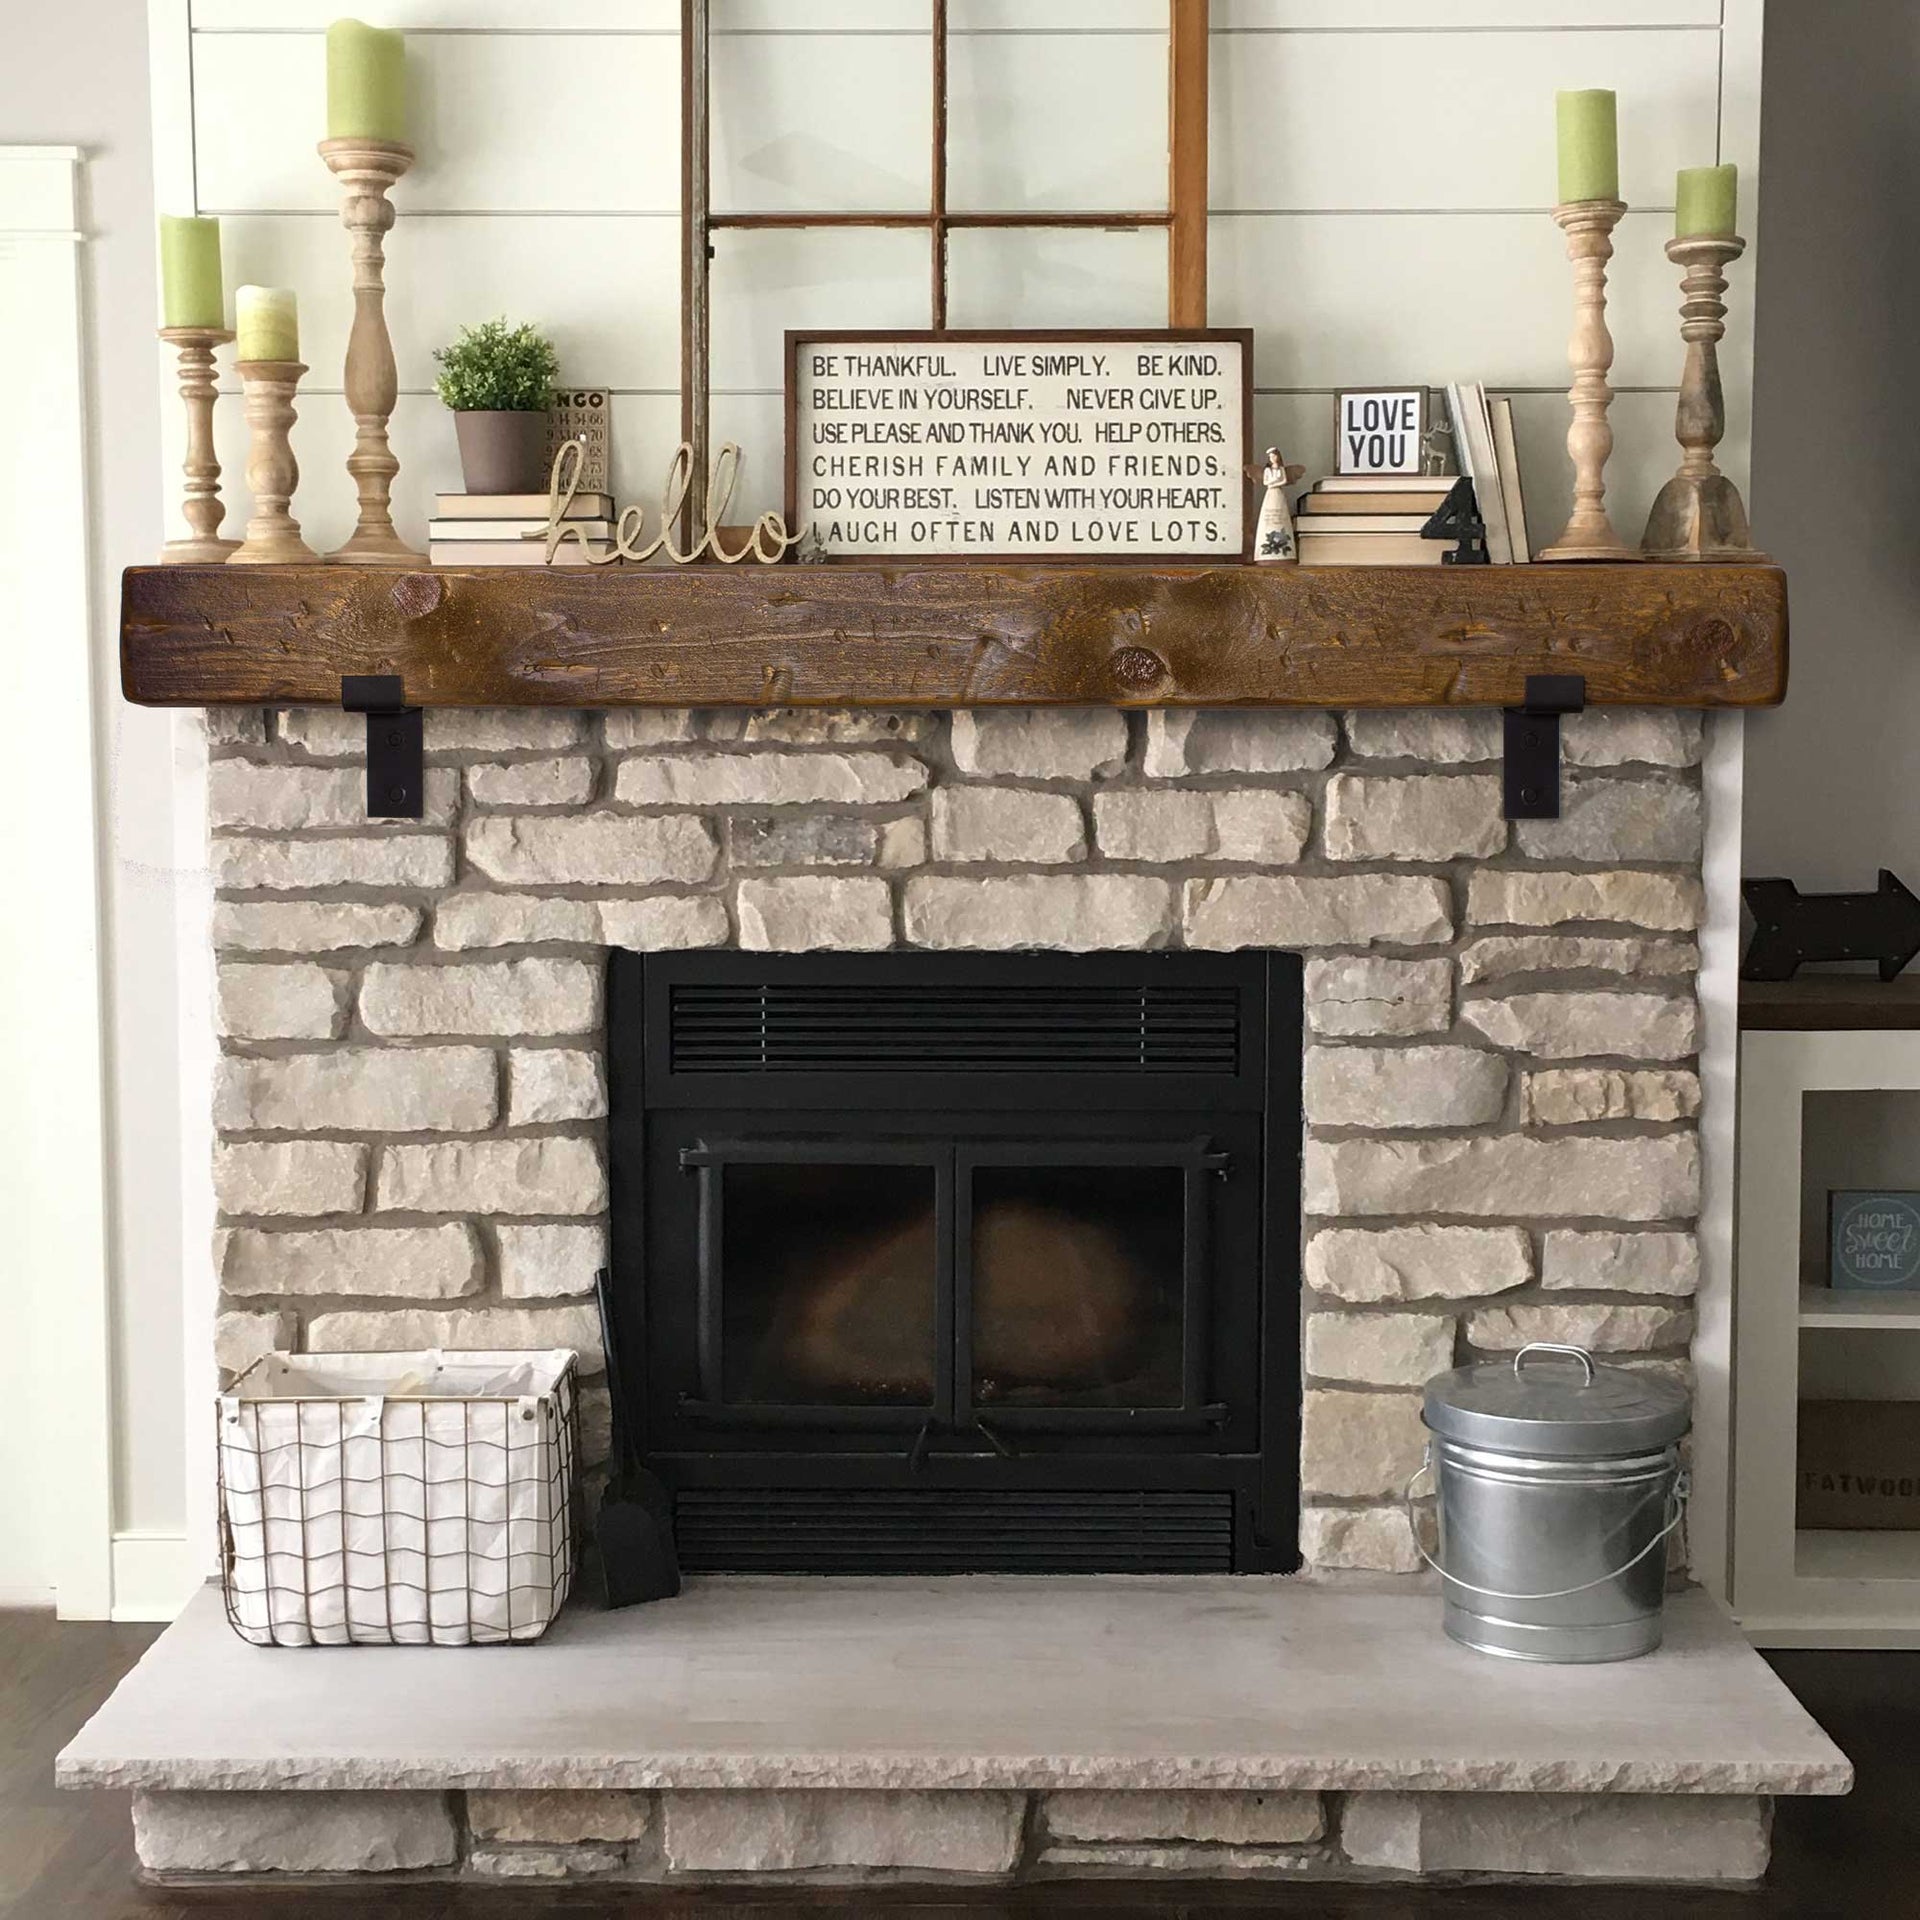 Discover the Heart of Your Home with a Customizable Fireplace Mantel